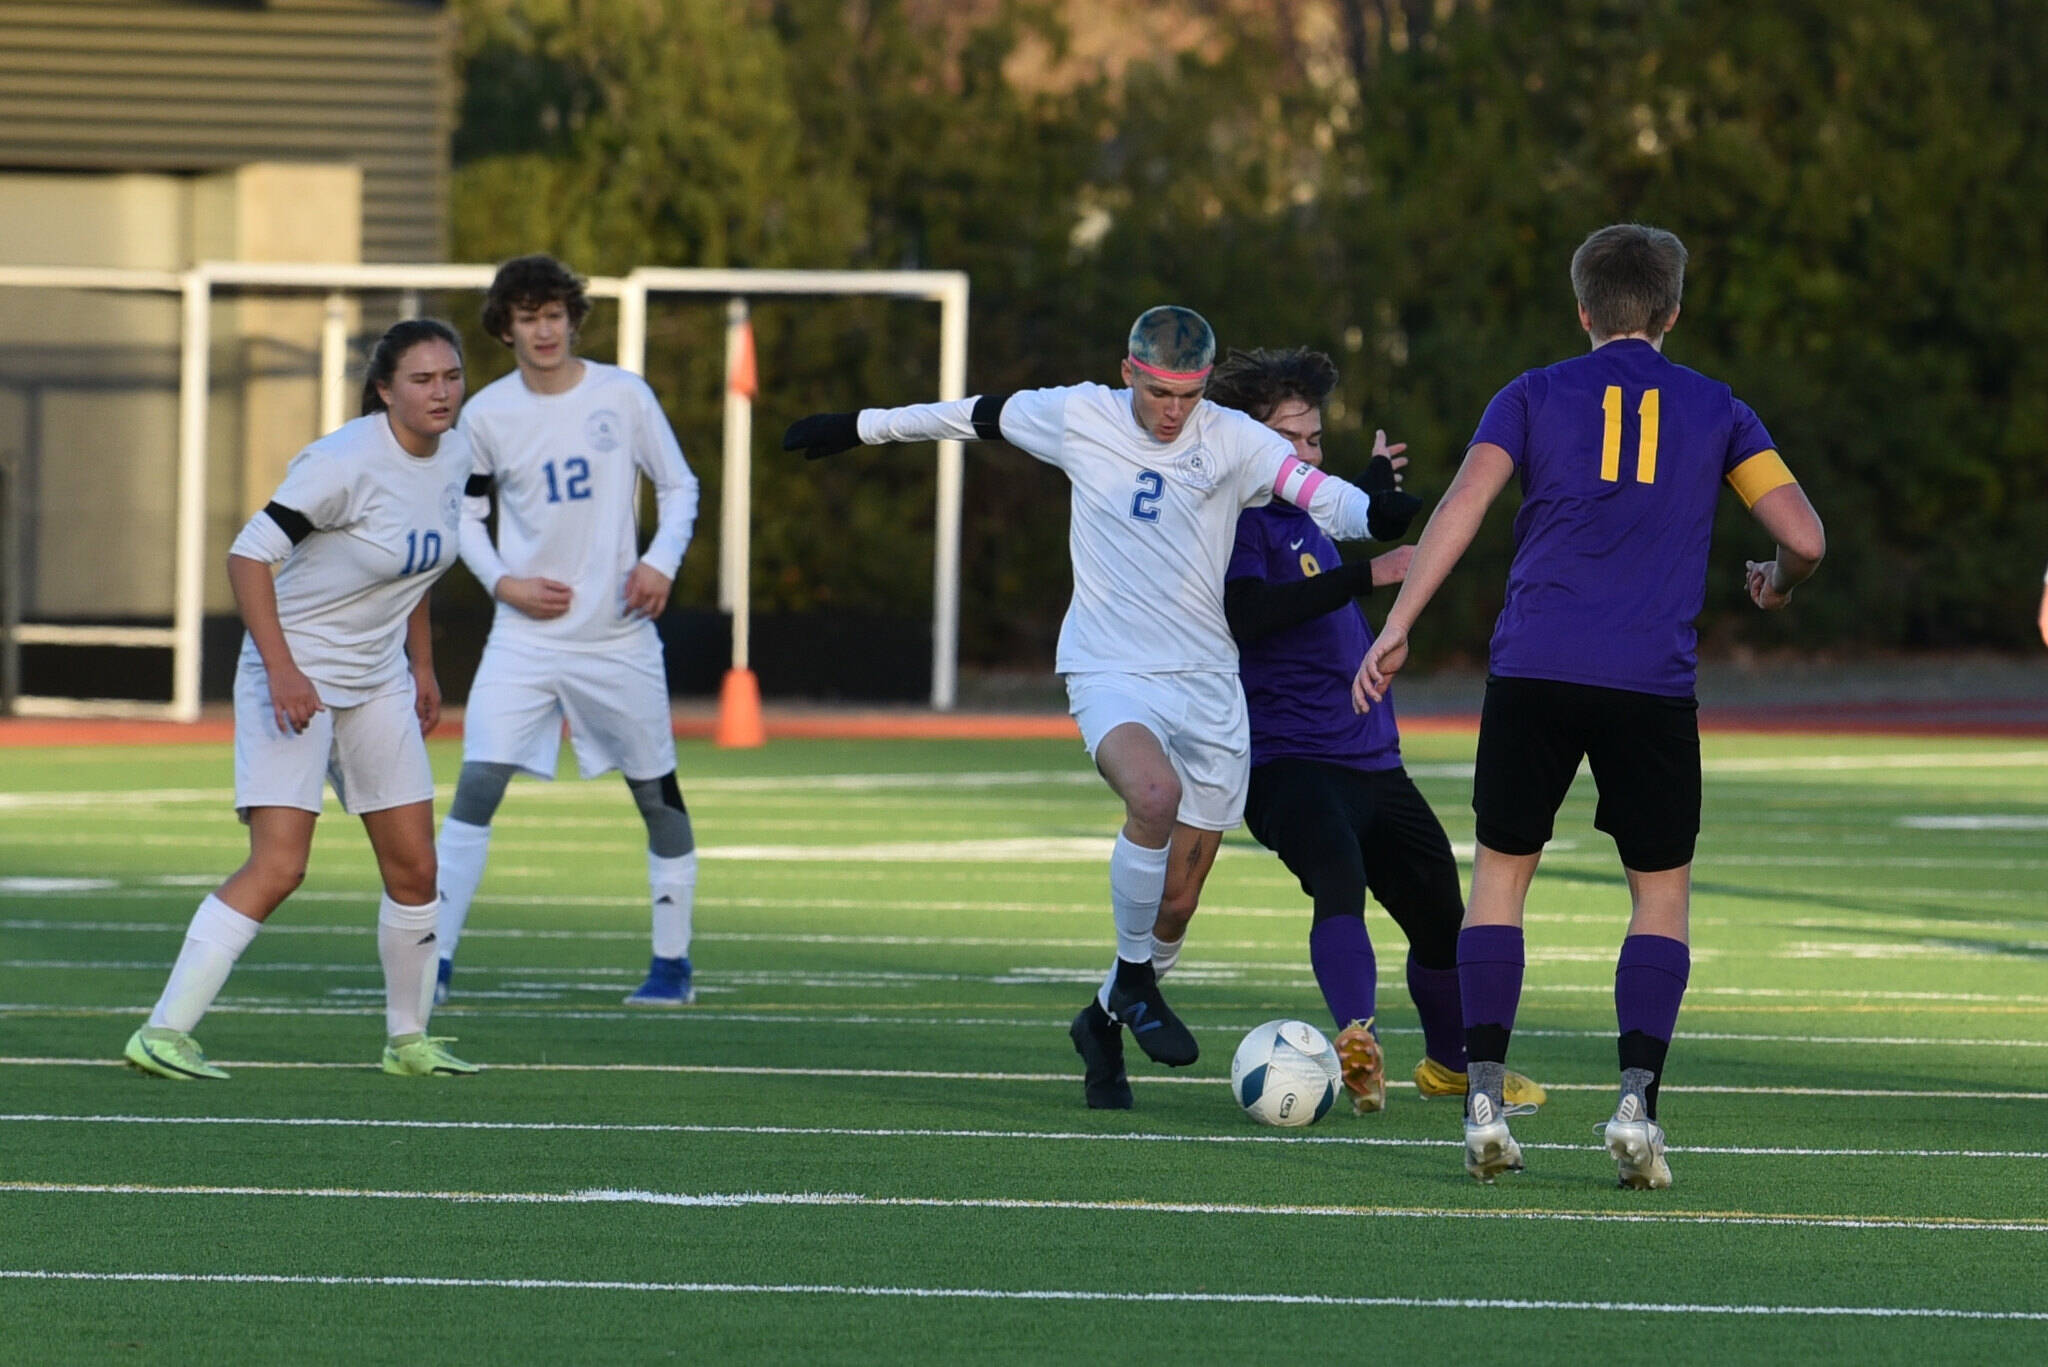 Chris Sutton photo
The Vikings (in white) playing against Friday Harbor in the state championship.